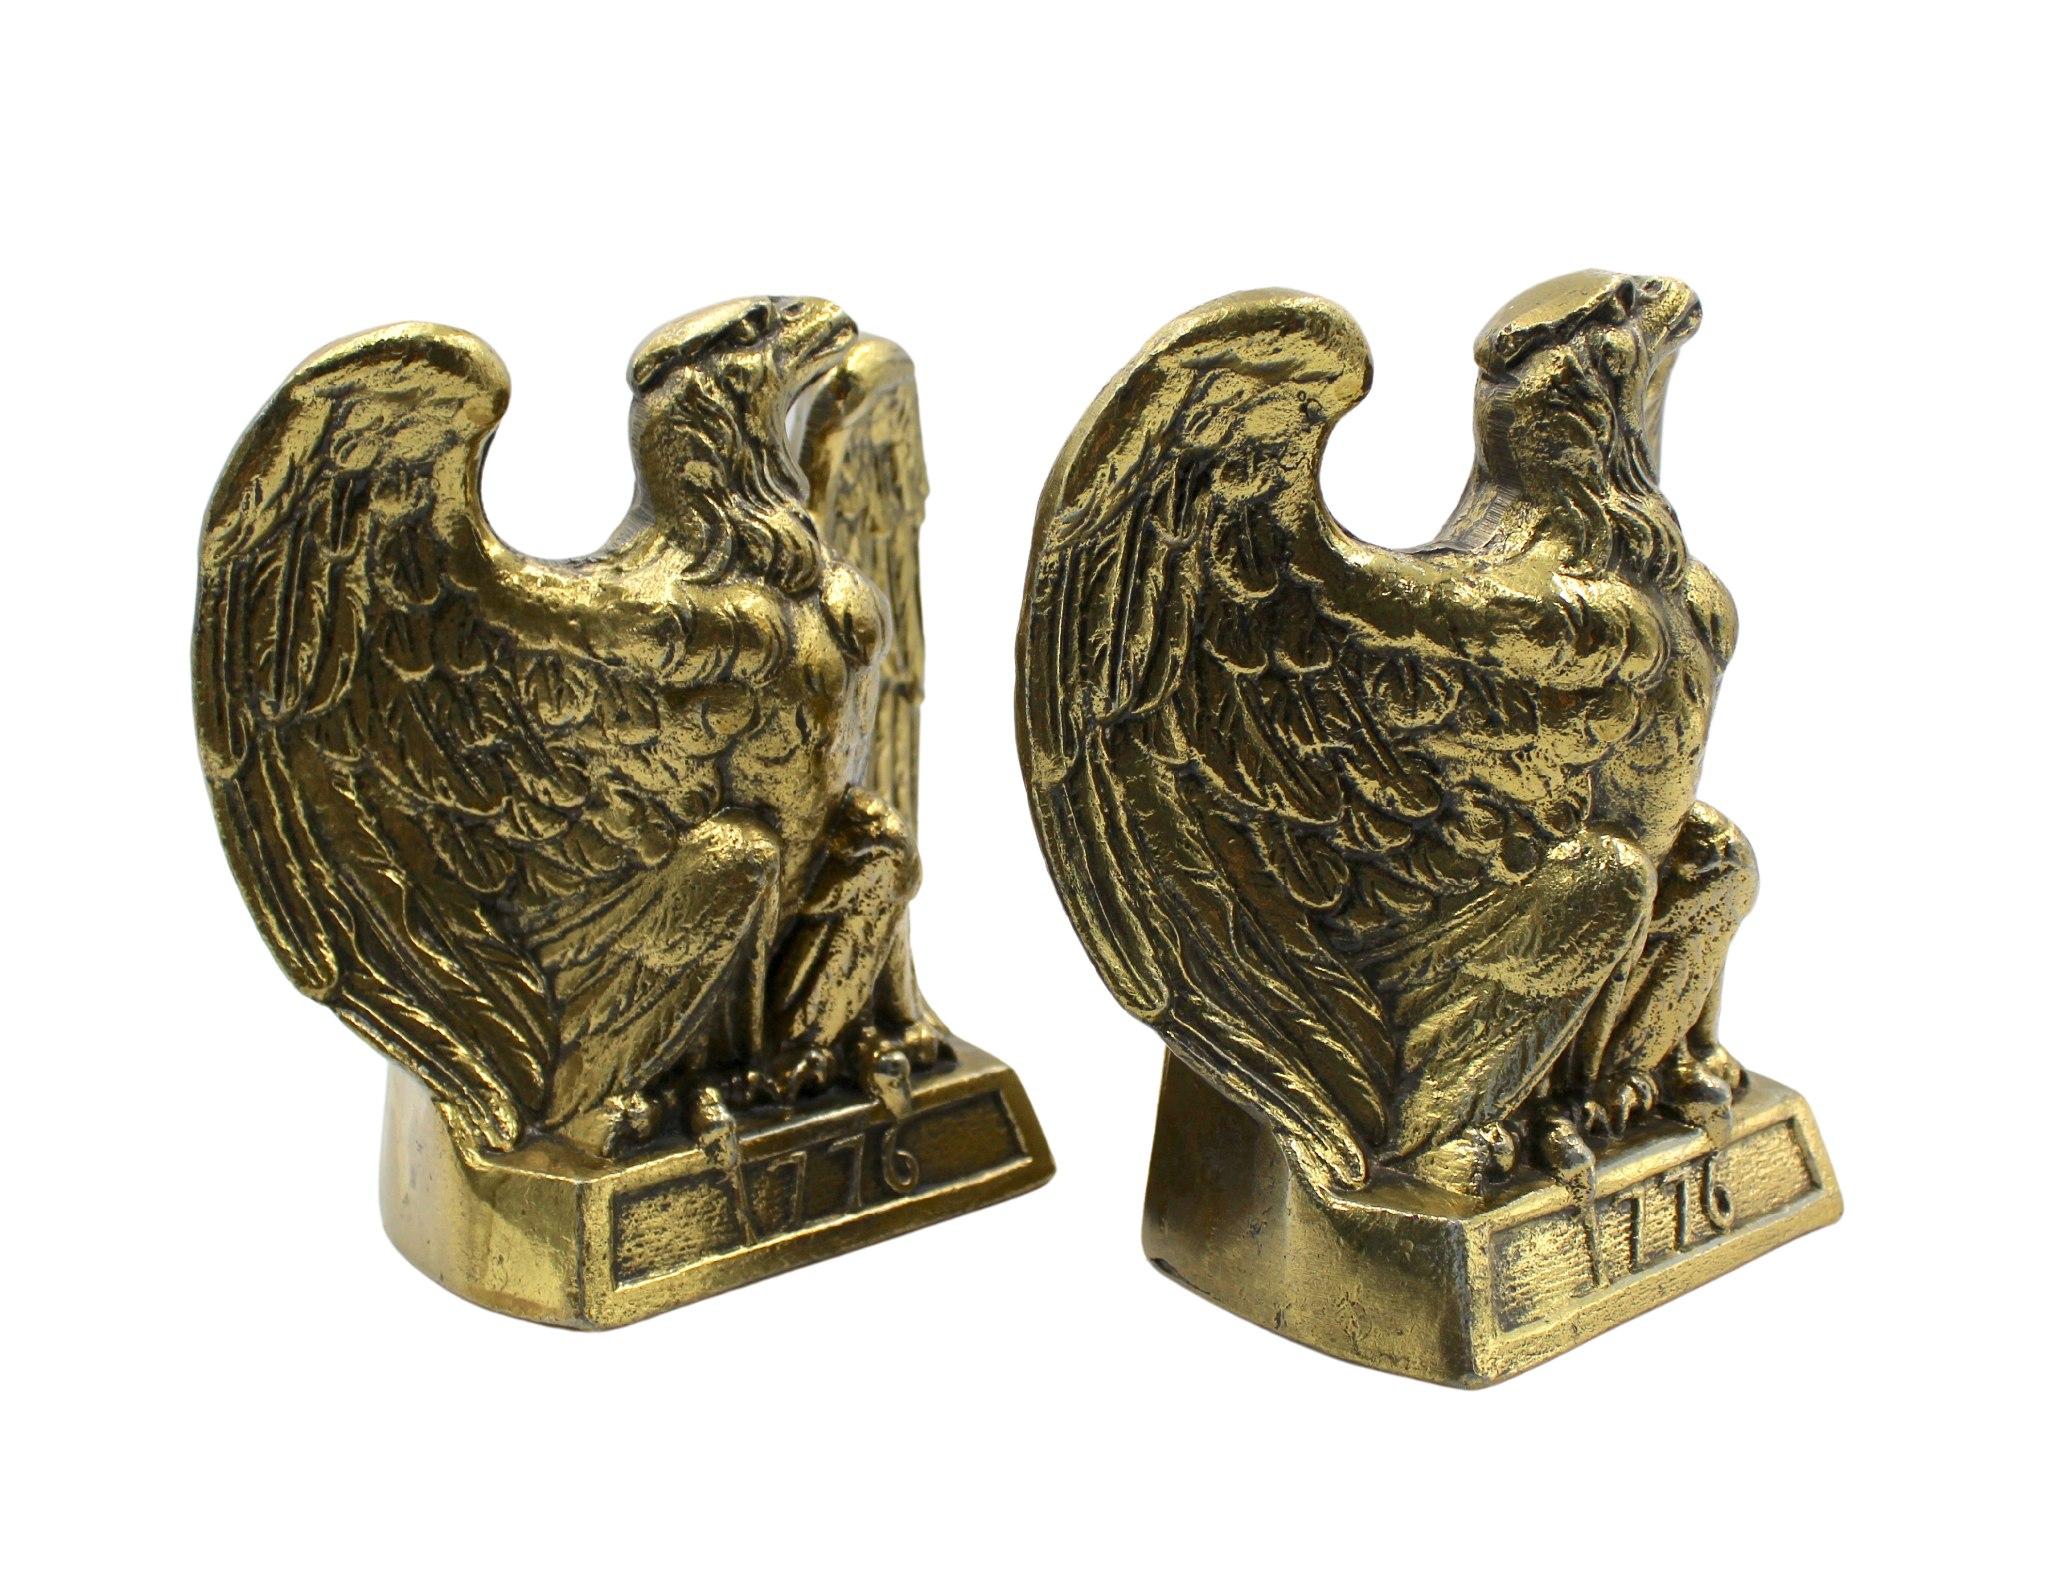 These appealing vintage brass bookends depict a bald eagle preparing for flight after perching on a base inscribed with “1776.” The bookends were made by Colonial Virginia, a crafter working out of Hampton, Virginia in 1972. The realistic detail of